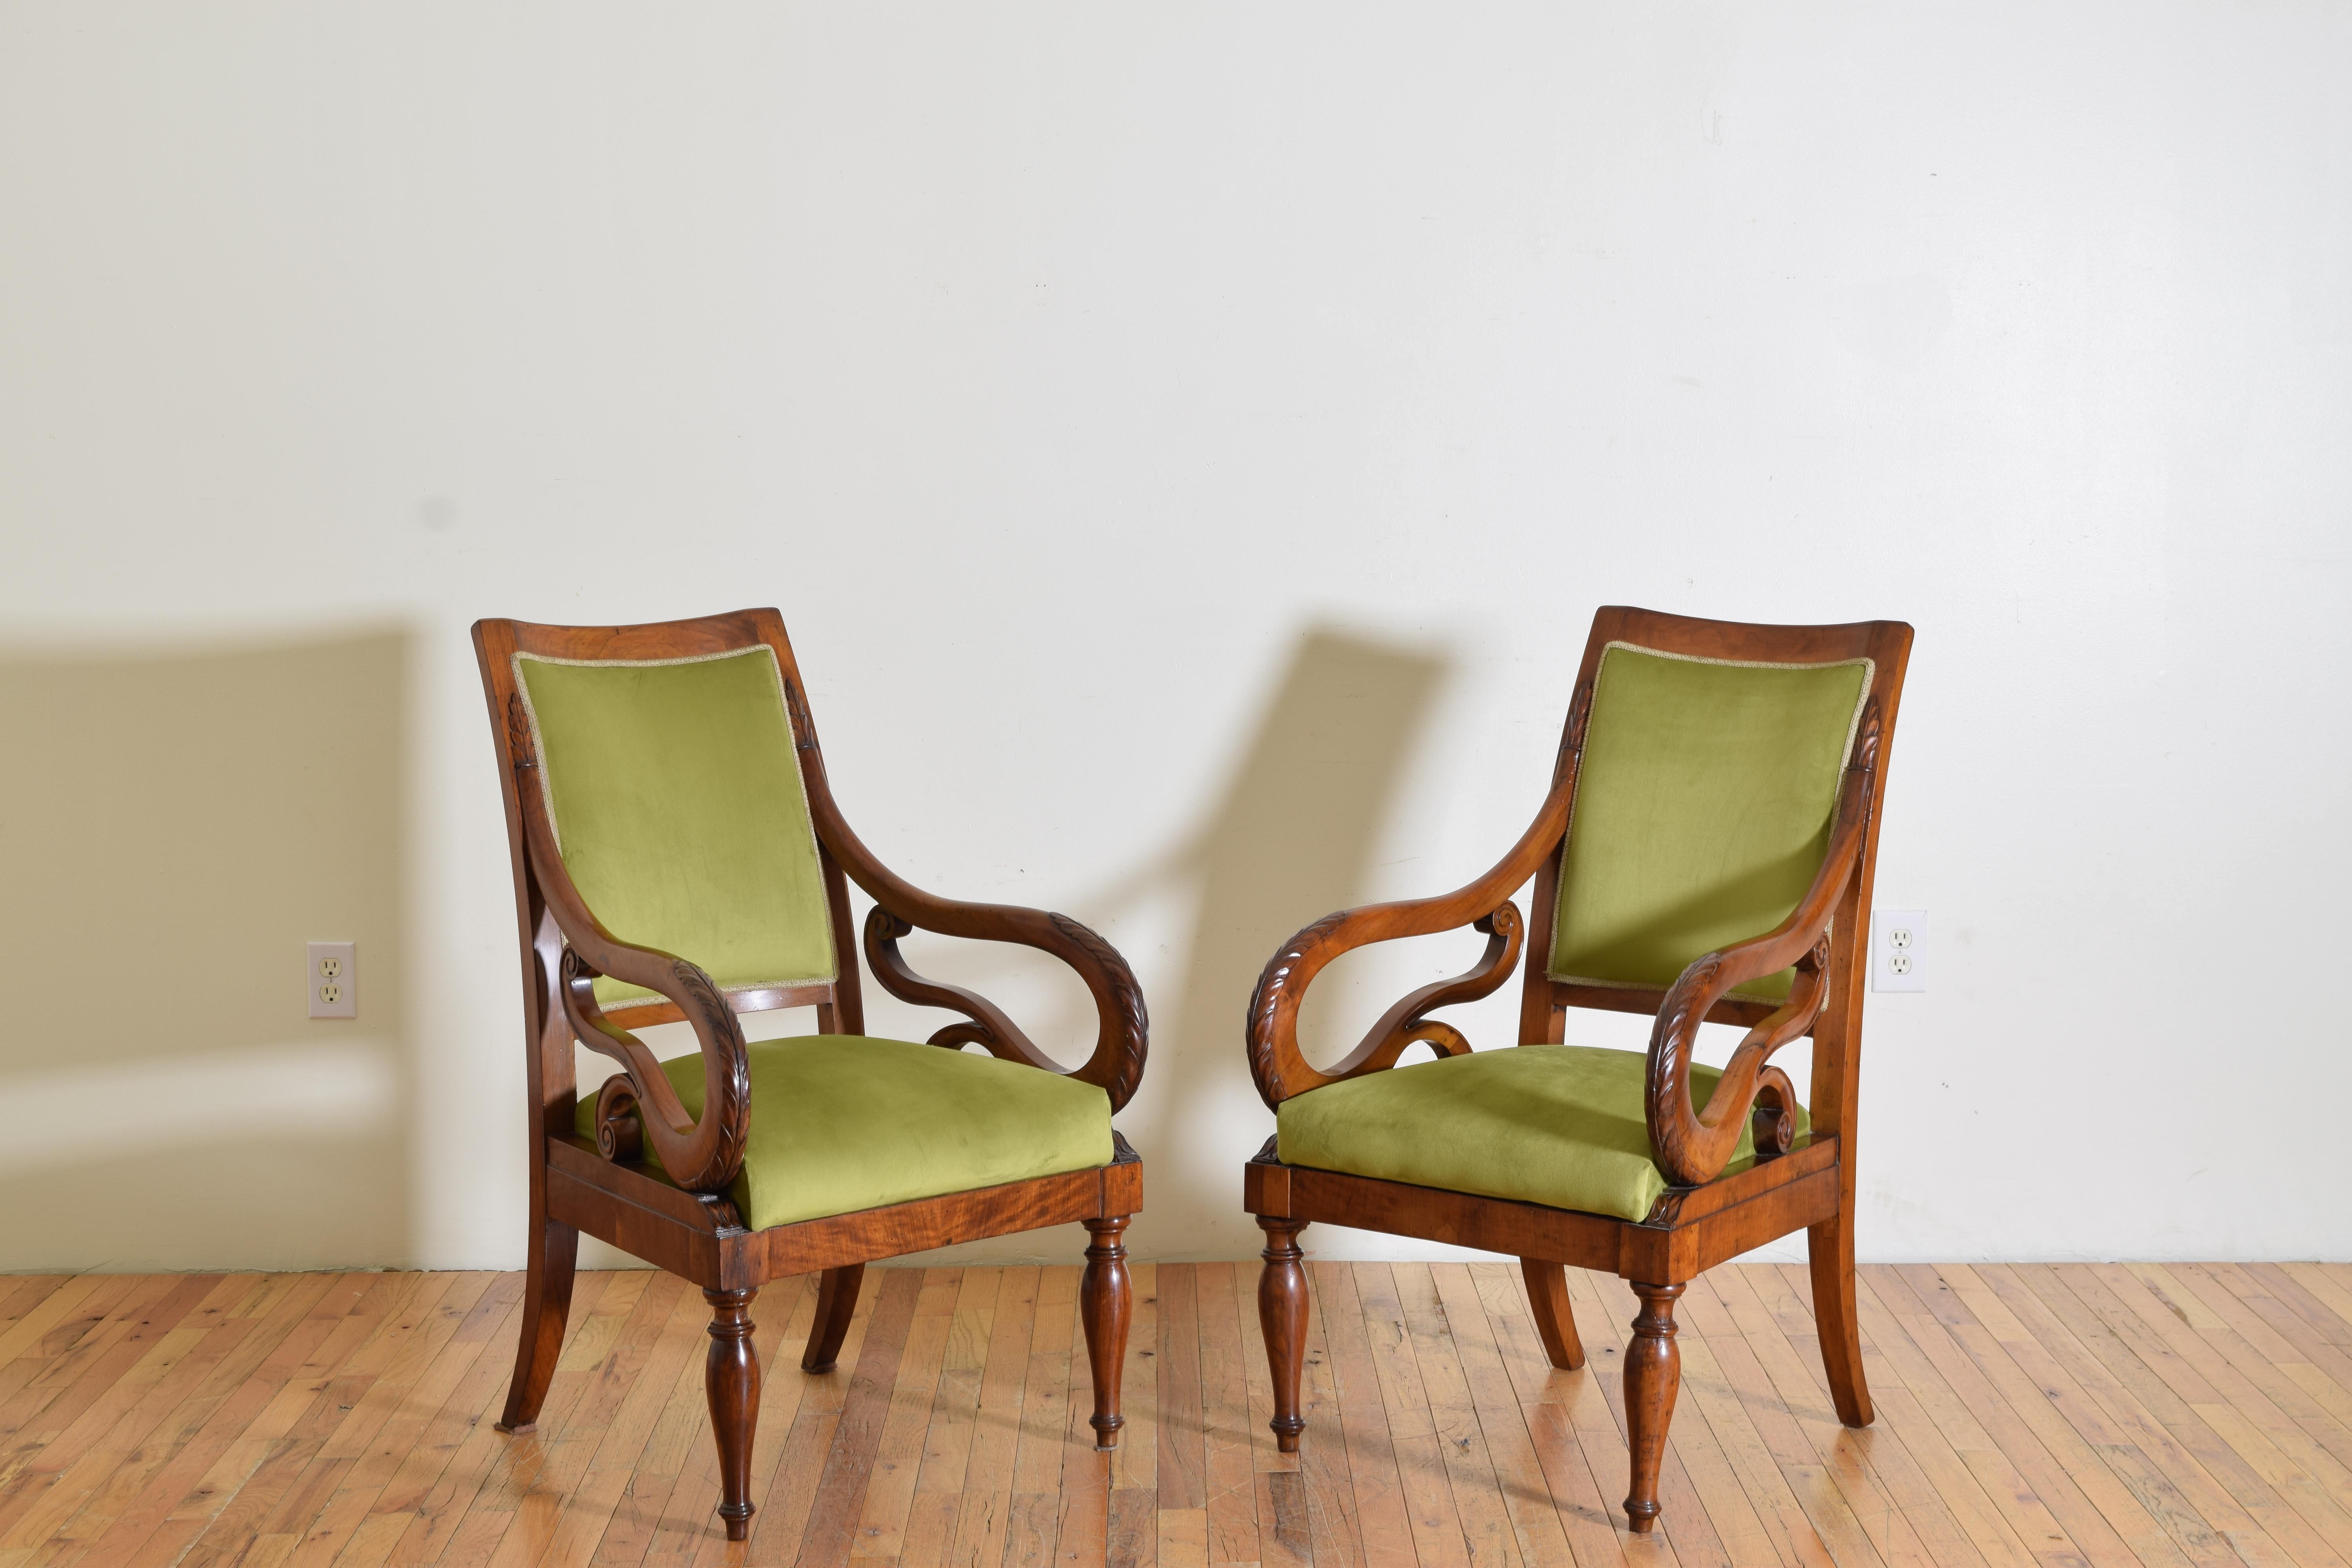 The chairs having flared backrests with slightly concave tops, the flare continuing at the rear block legs, the elaborately shaped and carved arms resting on square frames raised on elegantly turned front legs, upholstered in velvet